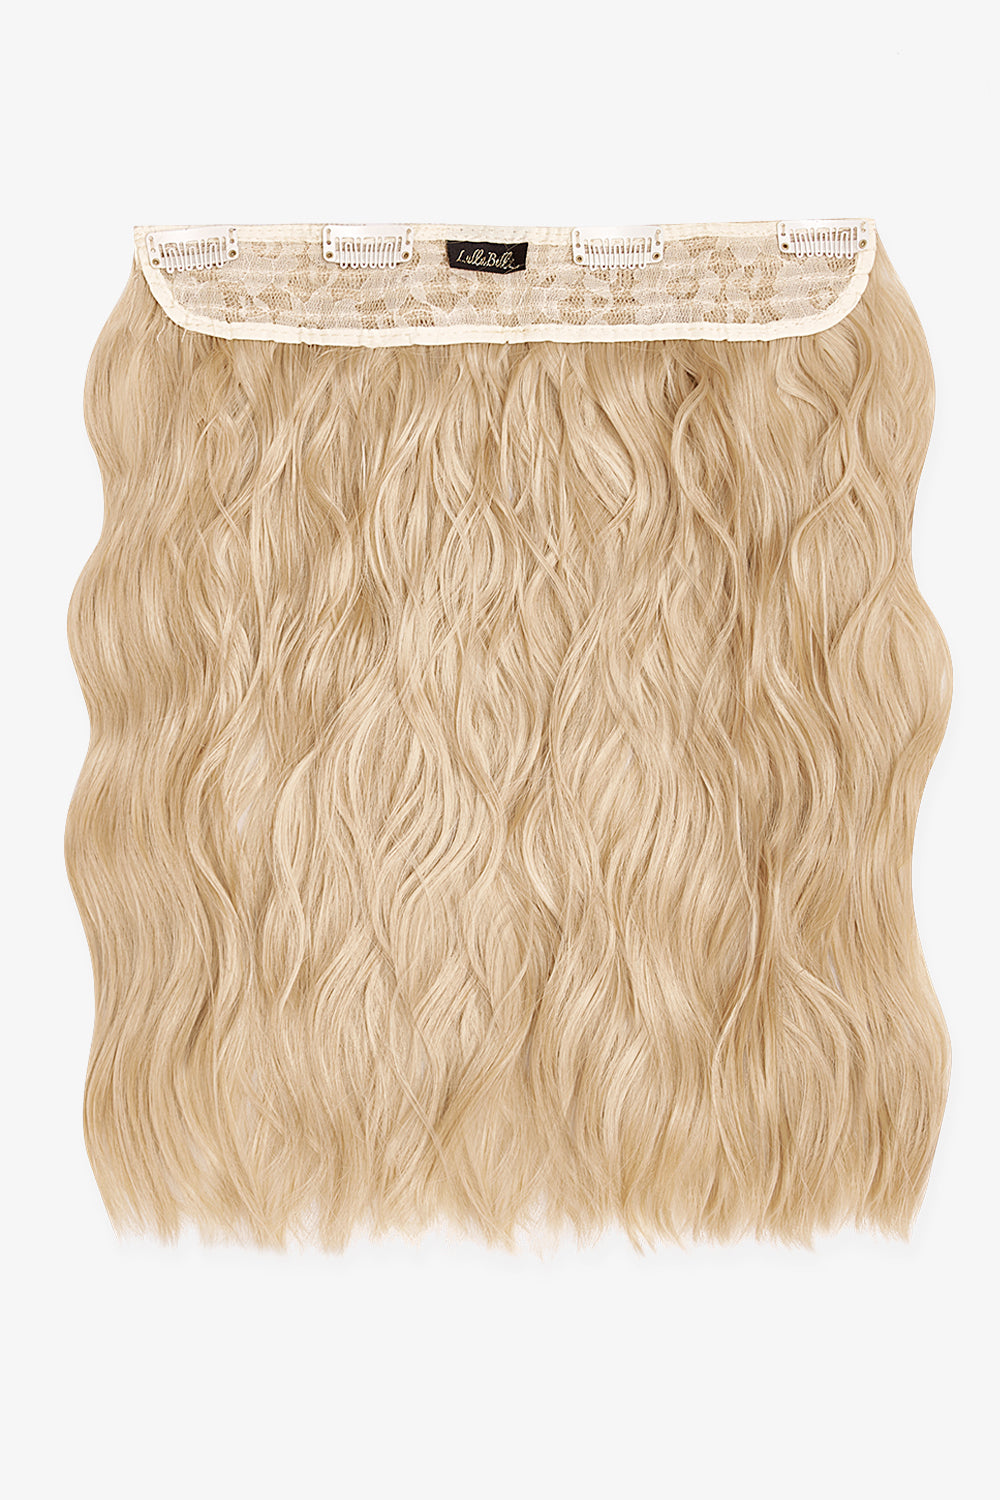 Thick 14" 1 Piece Textured Wave Clip-in Hair Extensions - Champagne Blonde